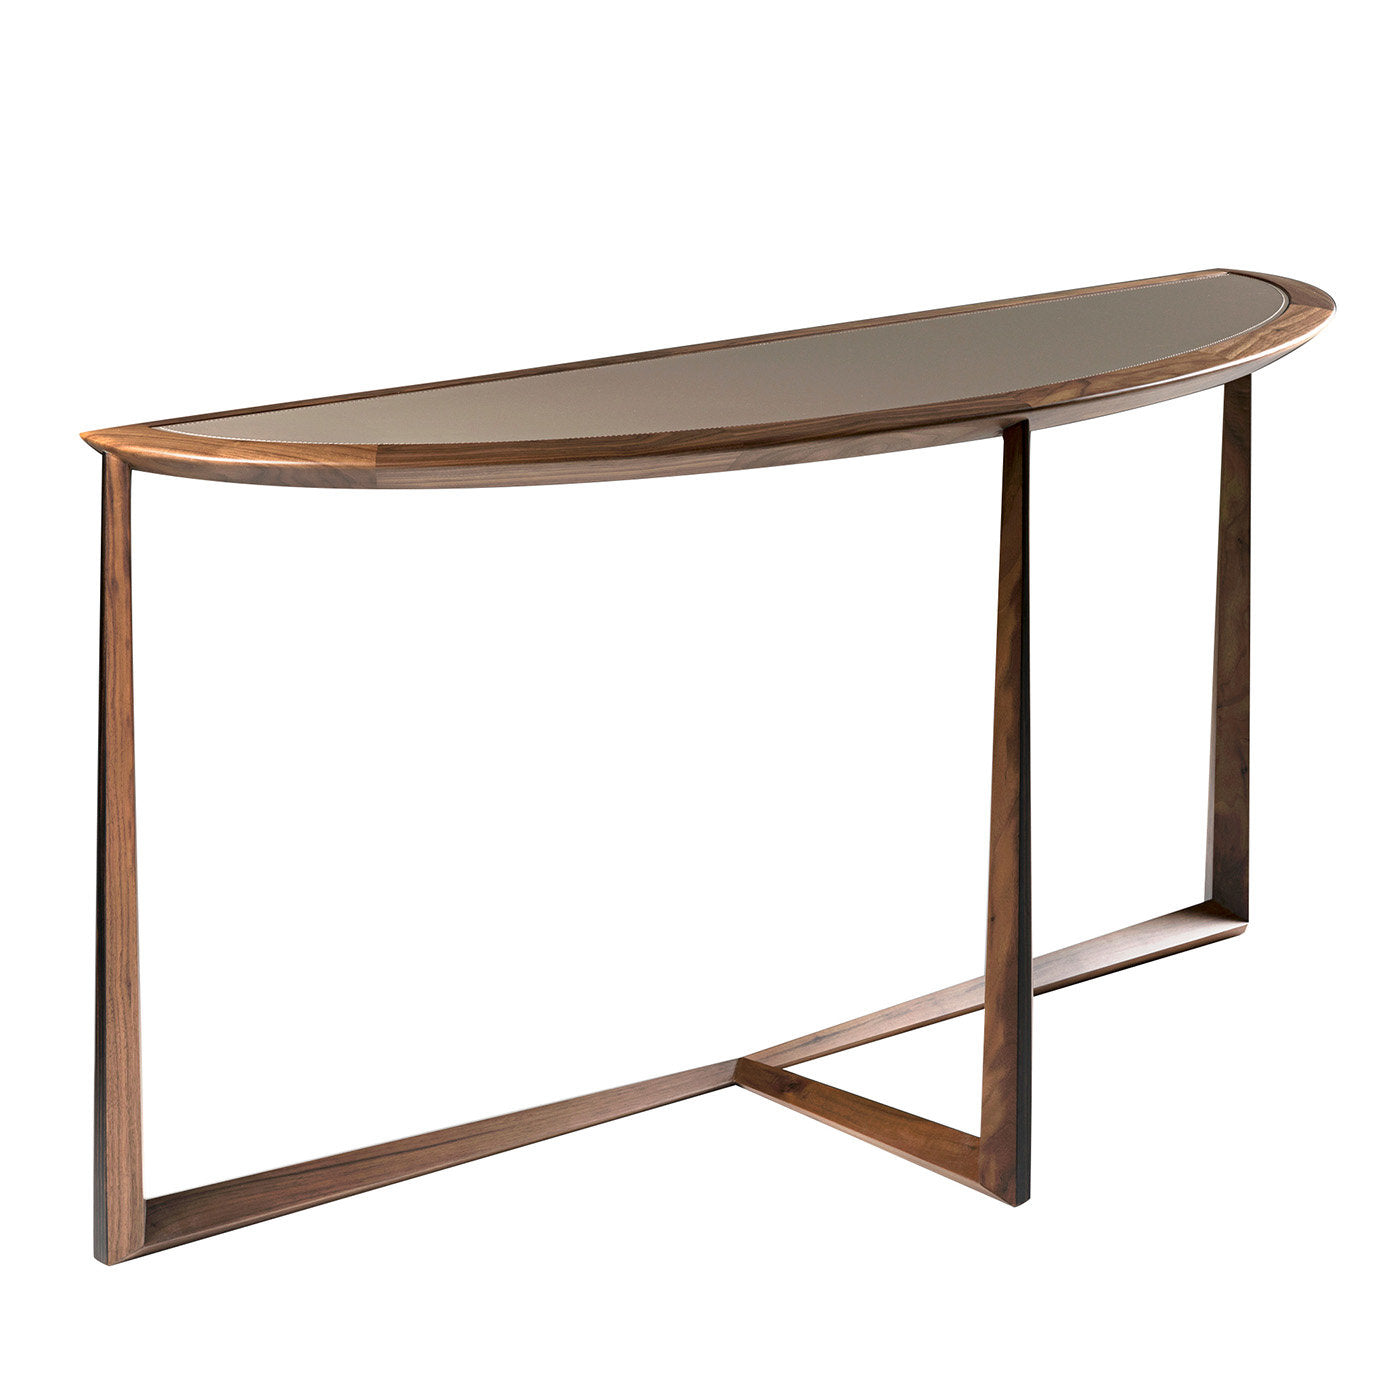 Pico Console by Ivano Colombo - Main view